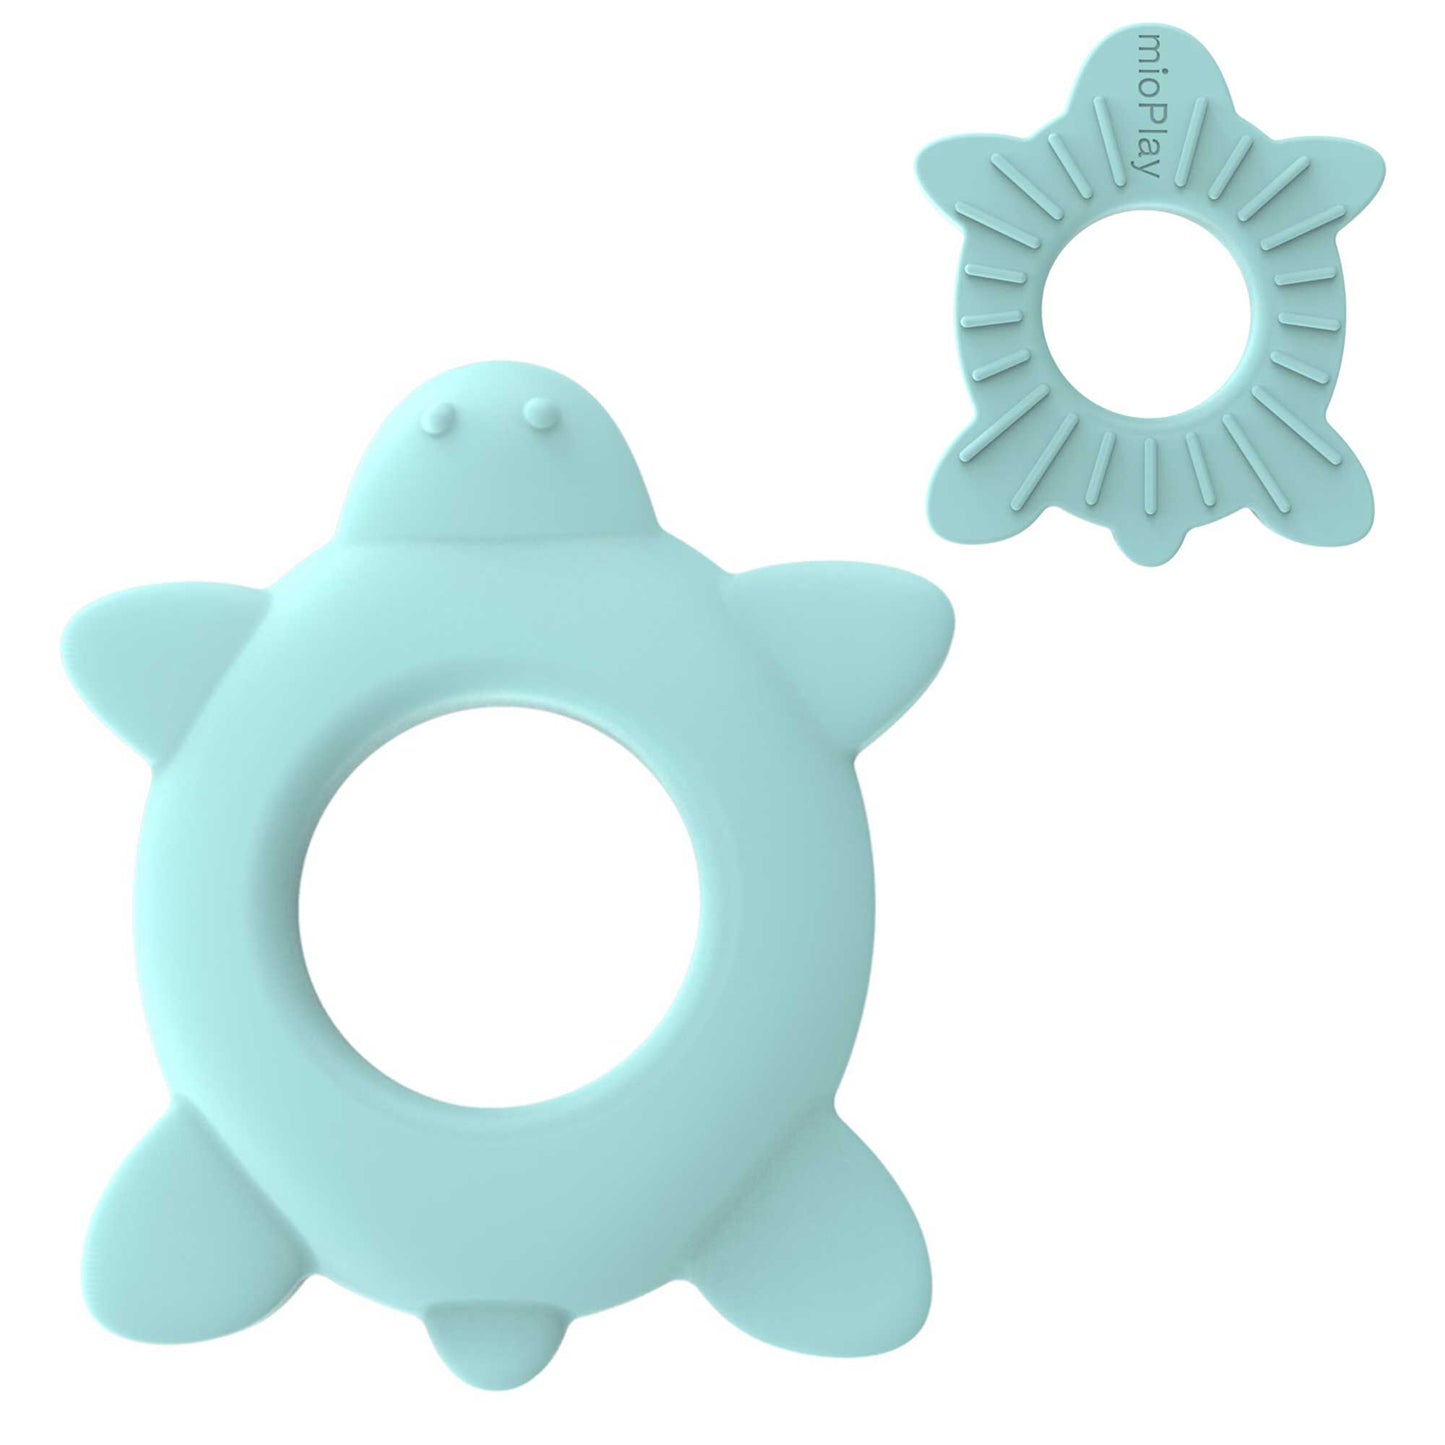 Tommy Turtle Teething Toy - Mint Green